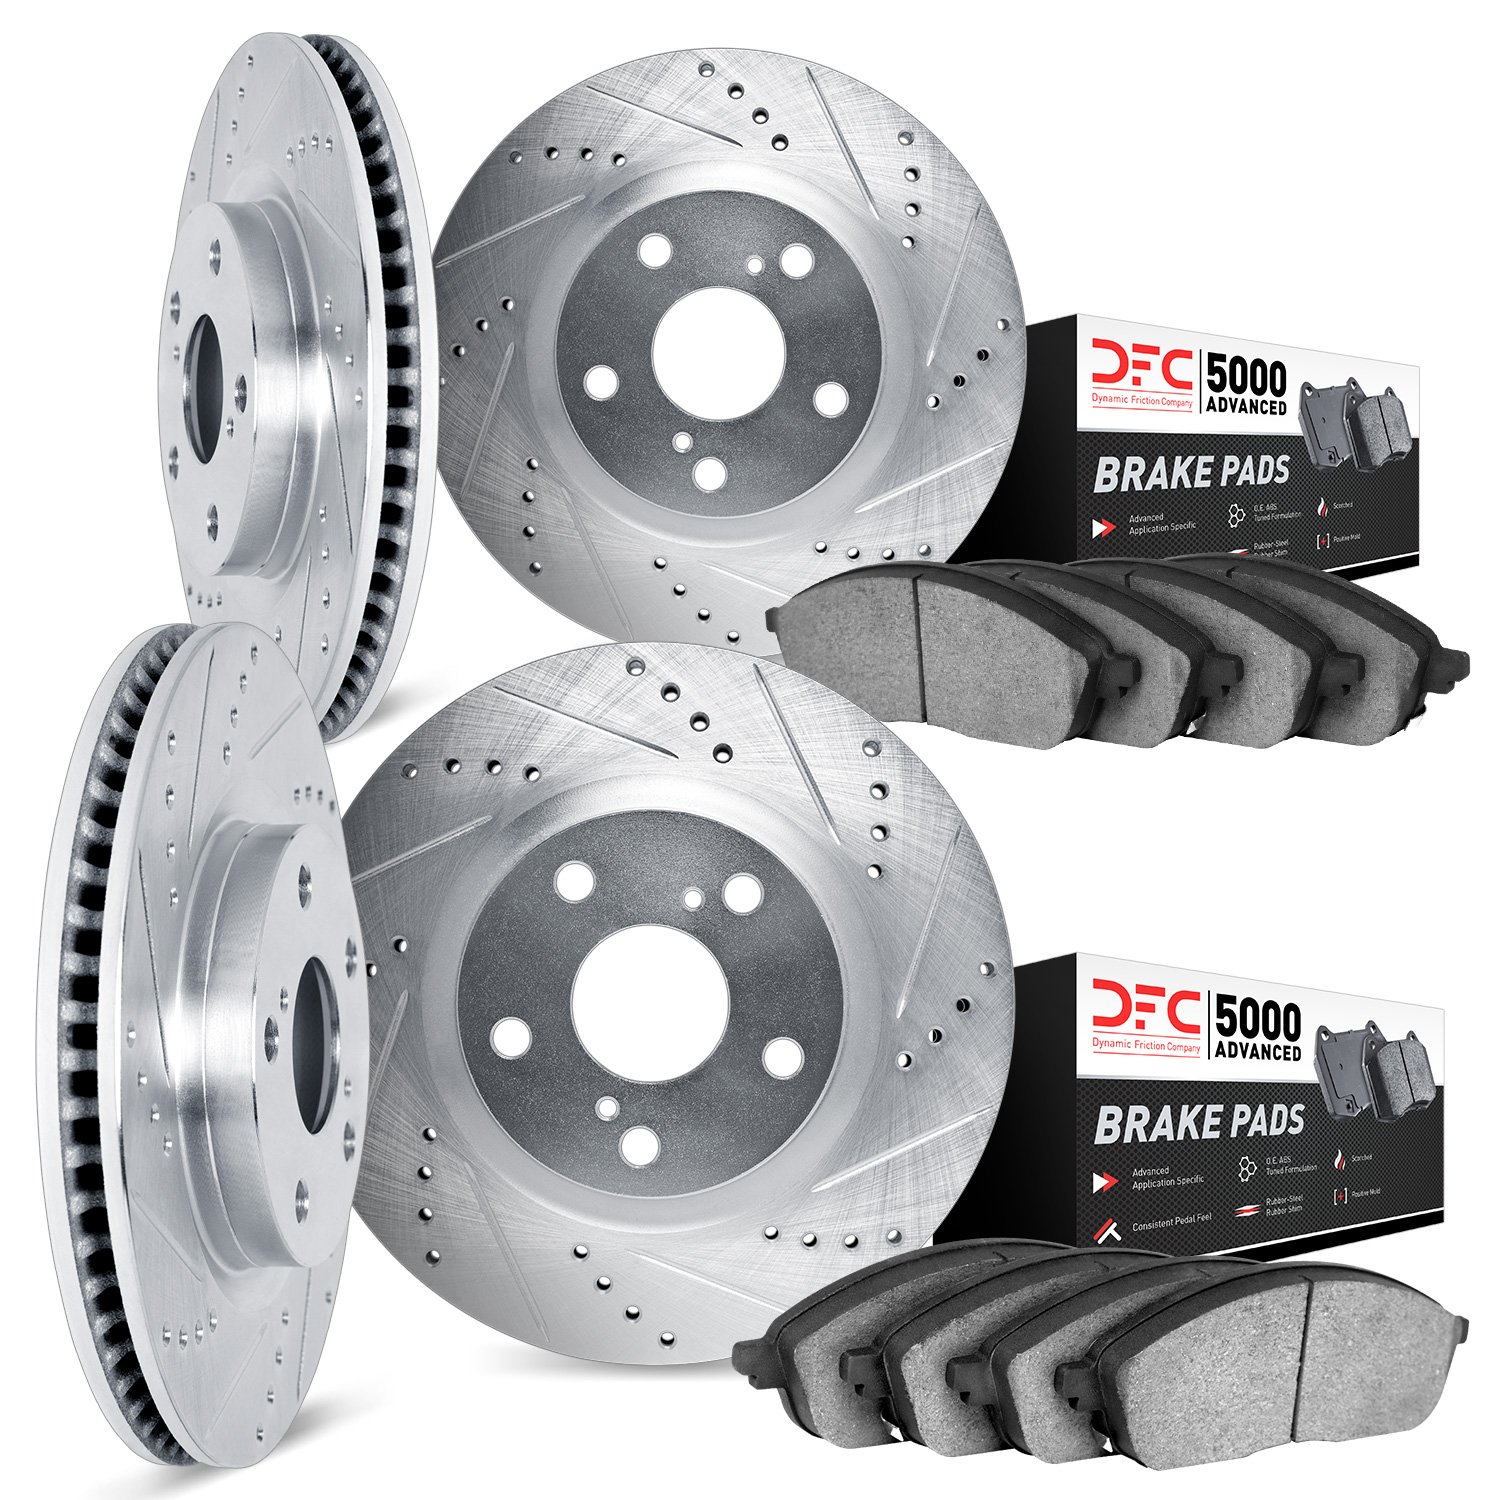 7504-20006 Drilled/Slotted Brake Rotors w/5000 Advanced Brake Pads Kit [Silver], 2006-2010 Jaguar, Position: Front and Rear